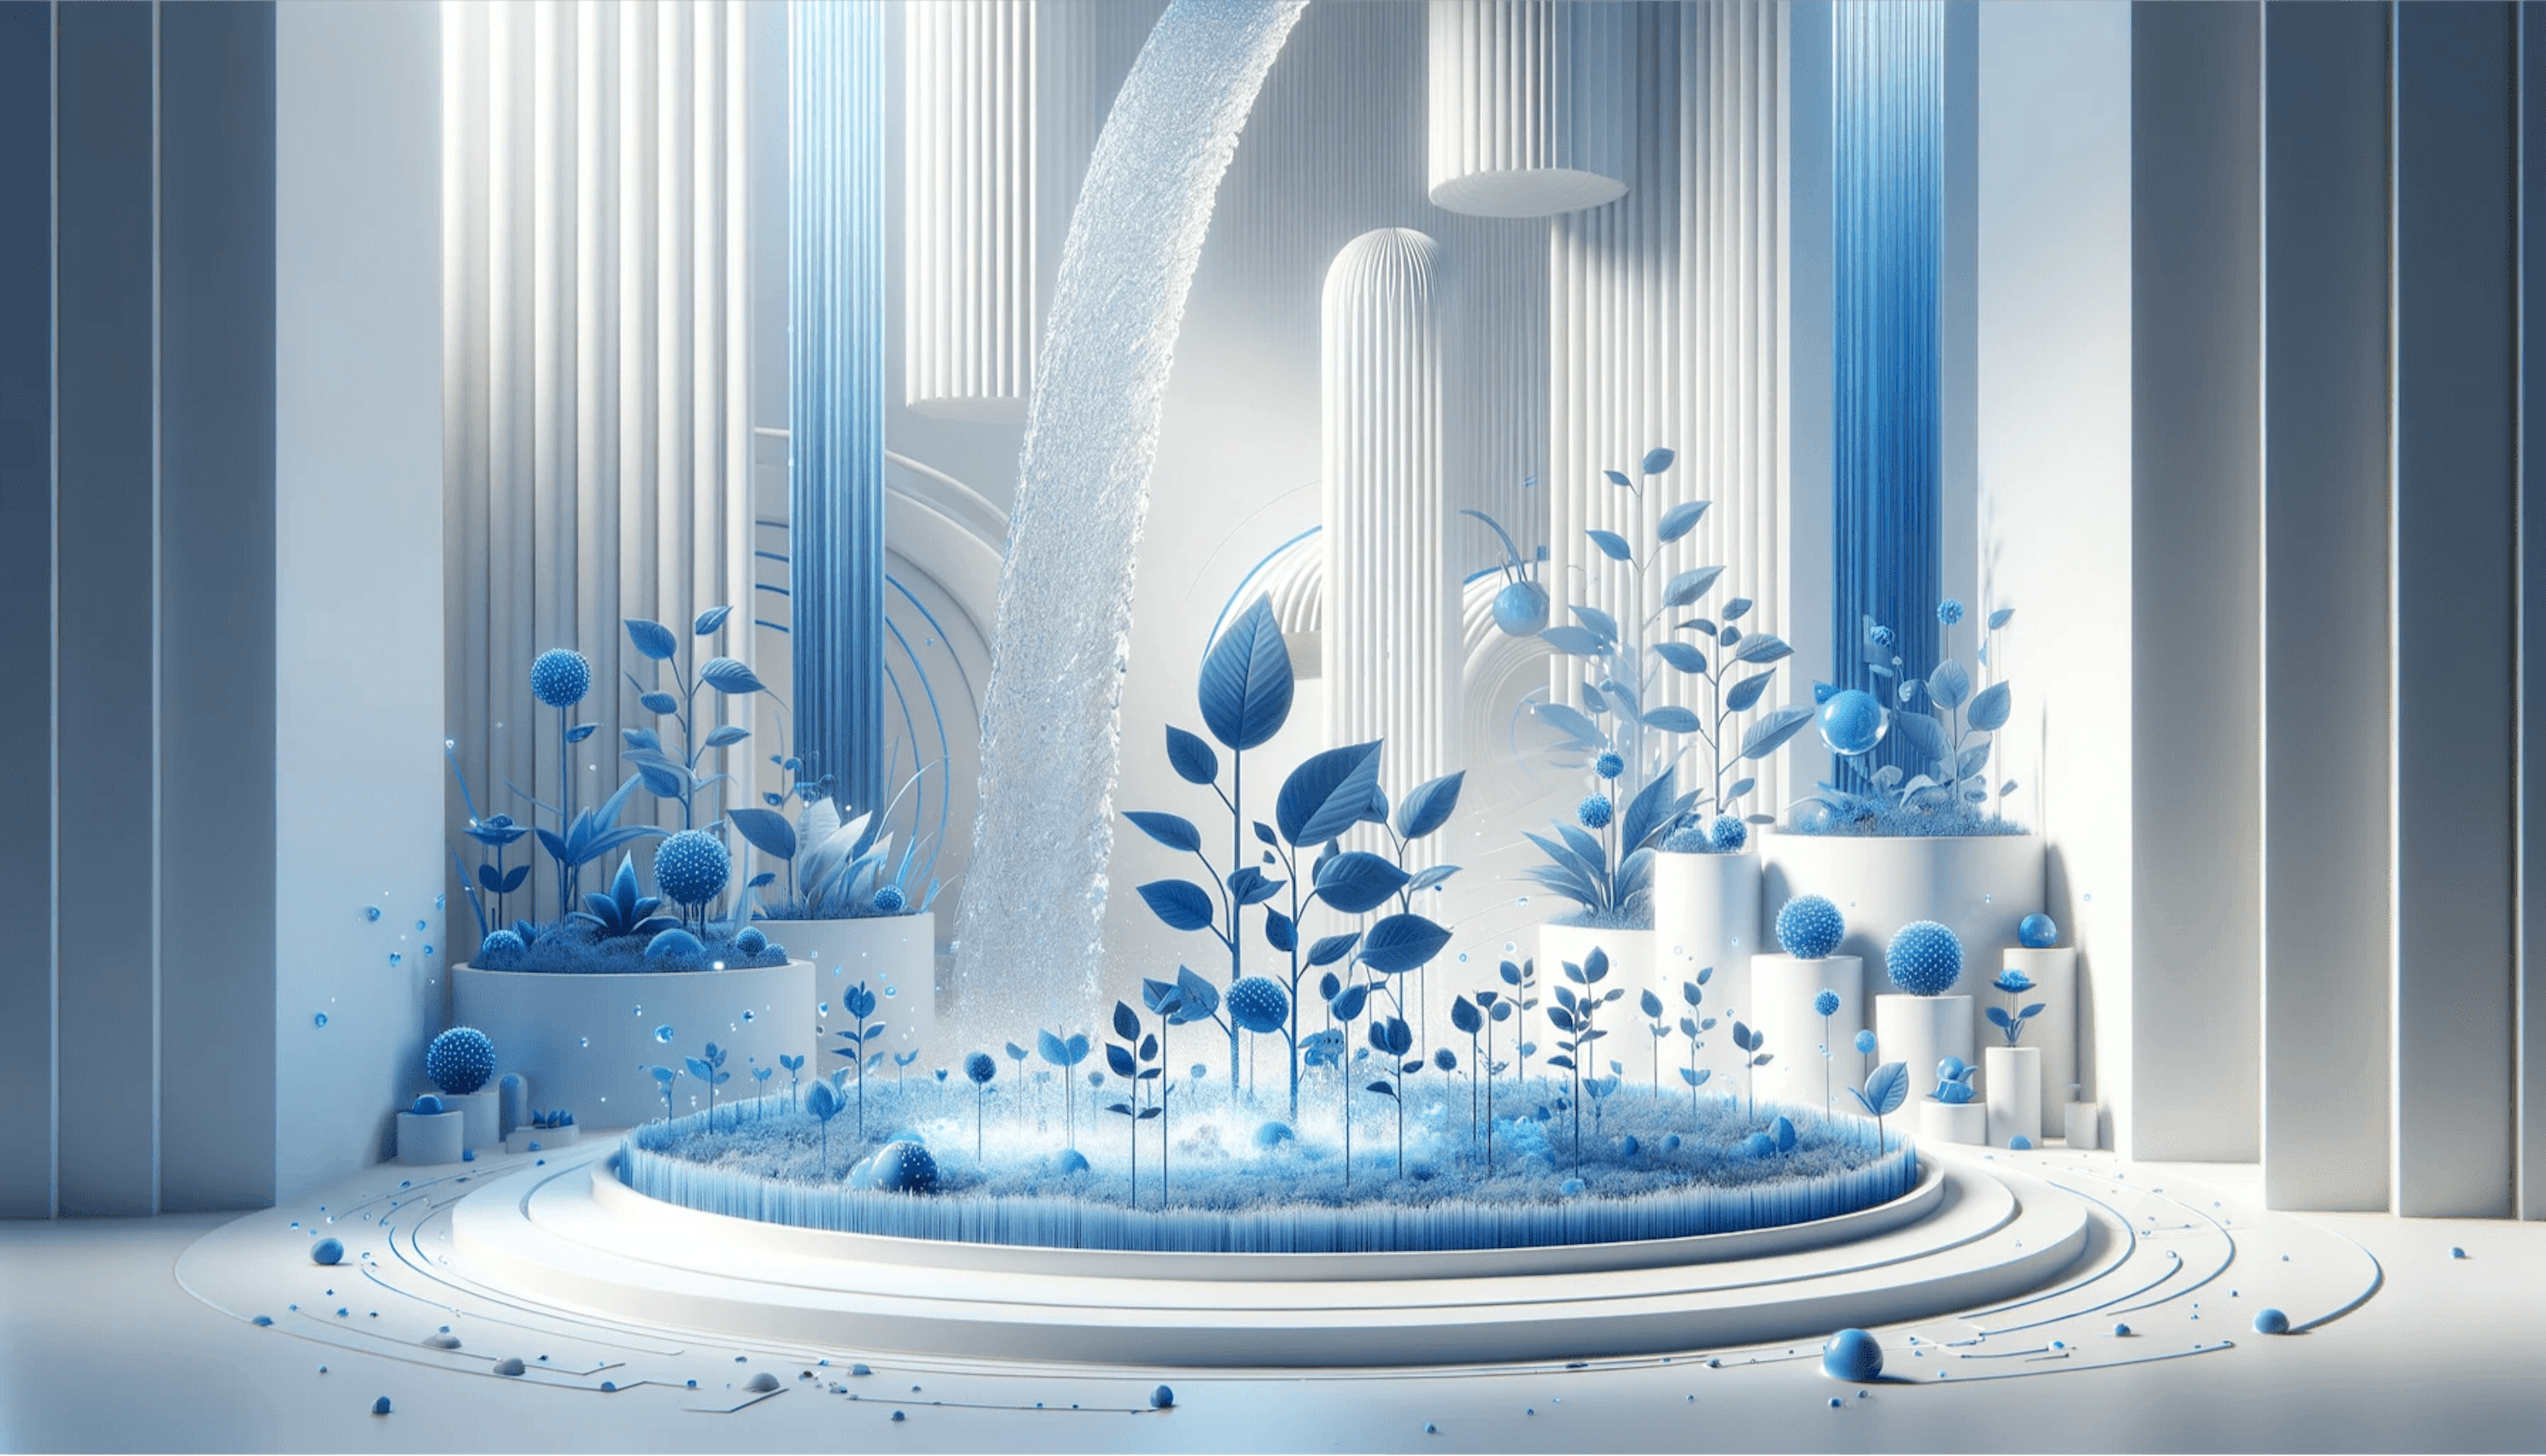 Futuristic garden with blue plants and a waterfall, set in a modern architectural space with columns and curved structures.